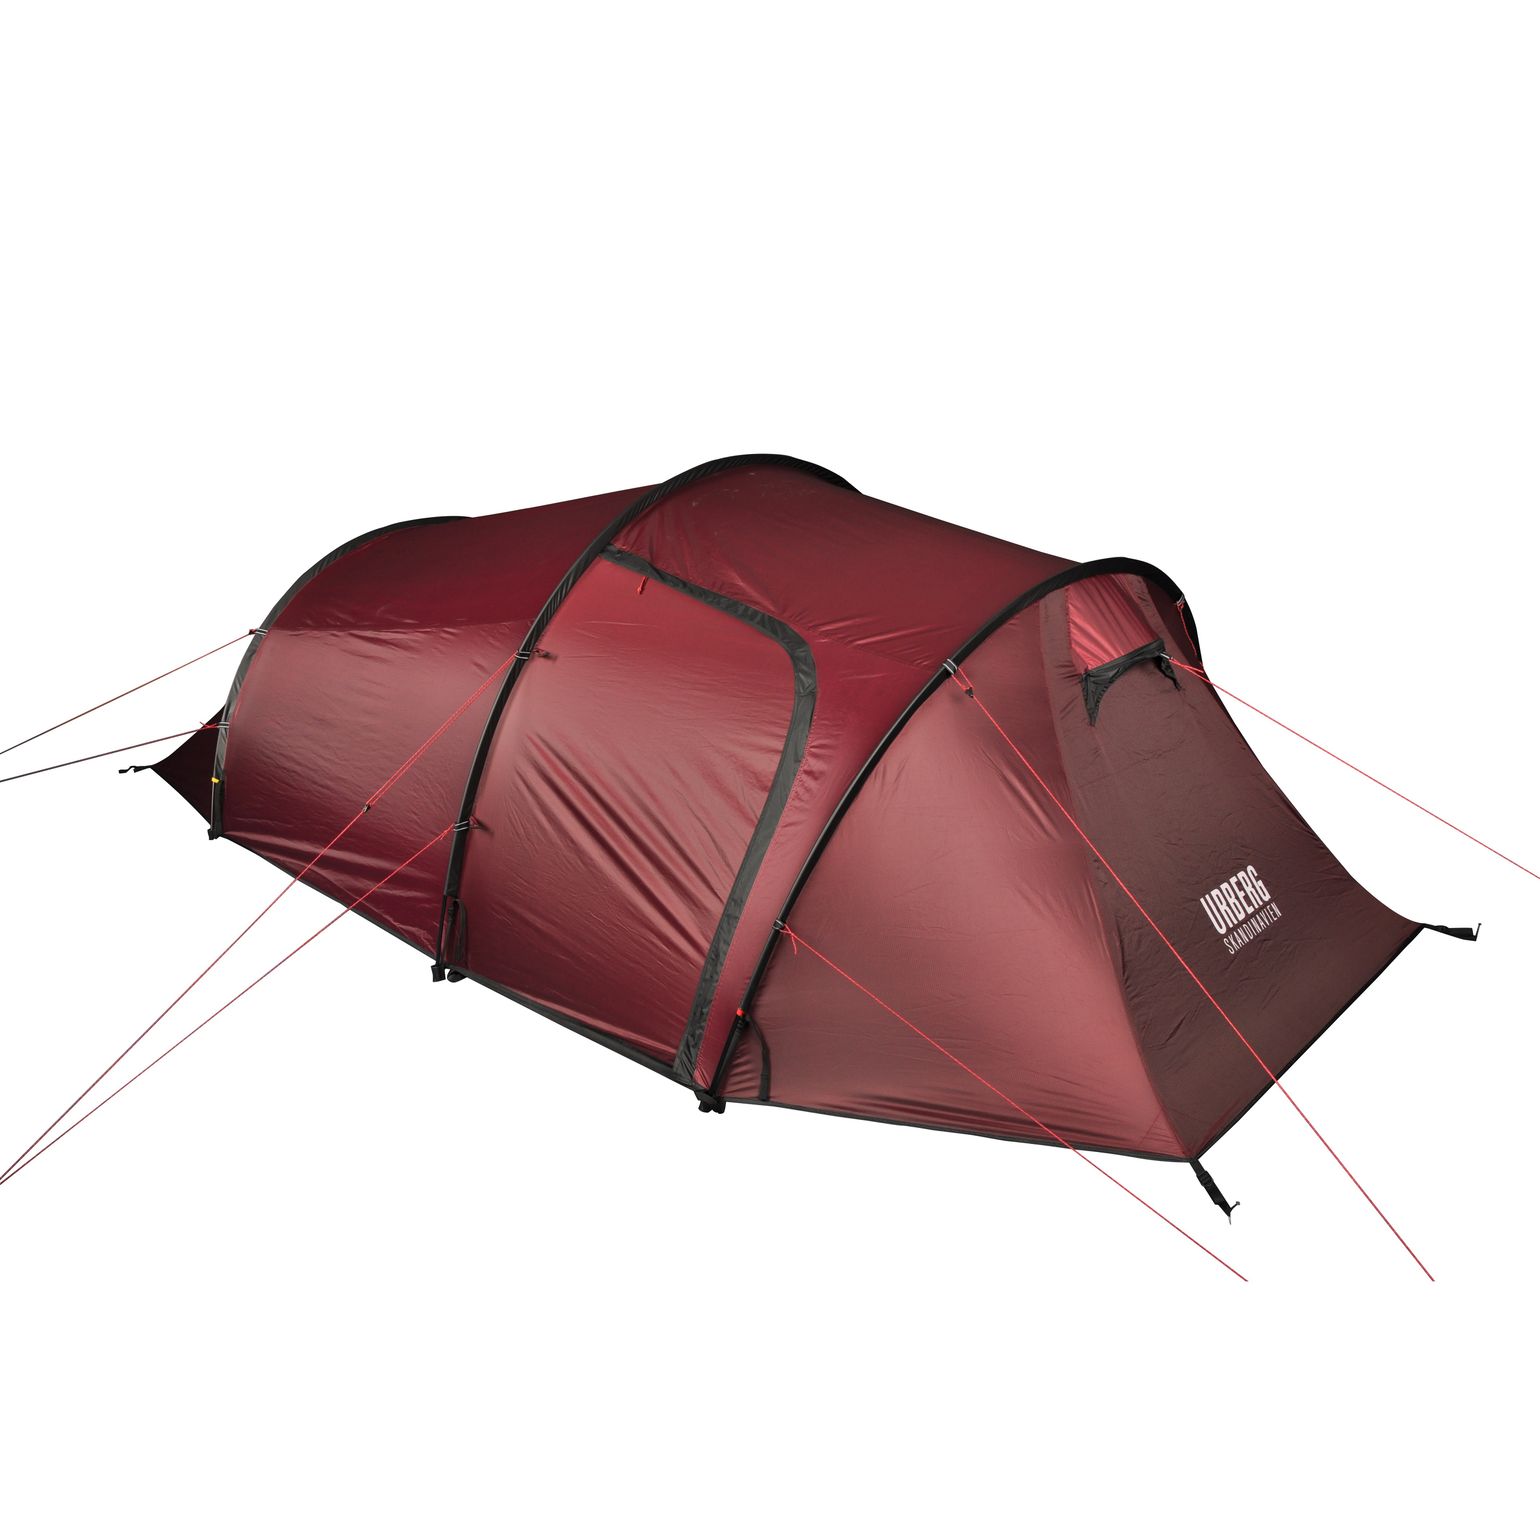 Urberg 3-person Tunnel Tent G5 Windsor Wine